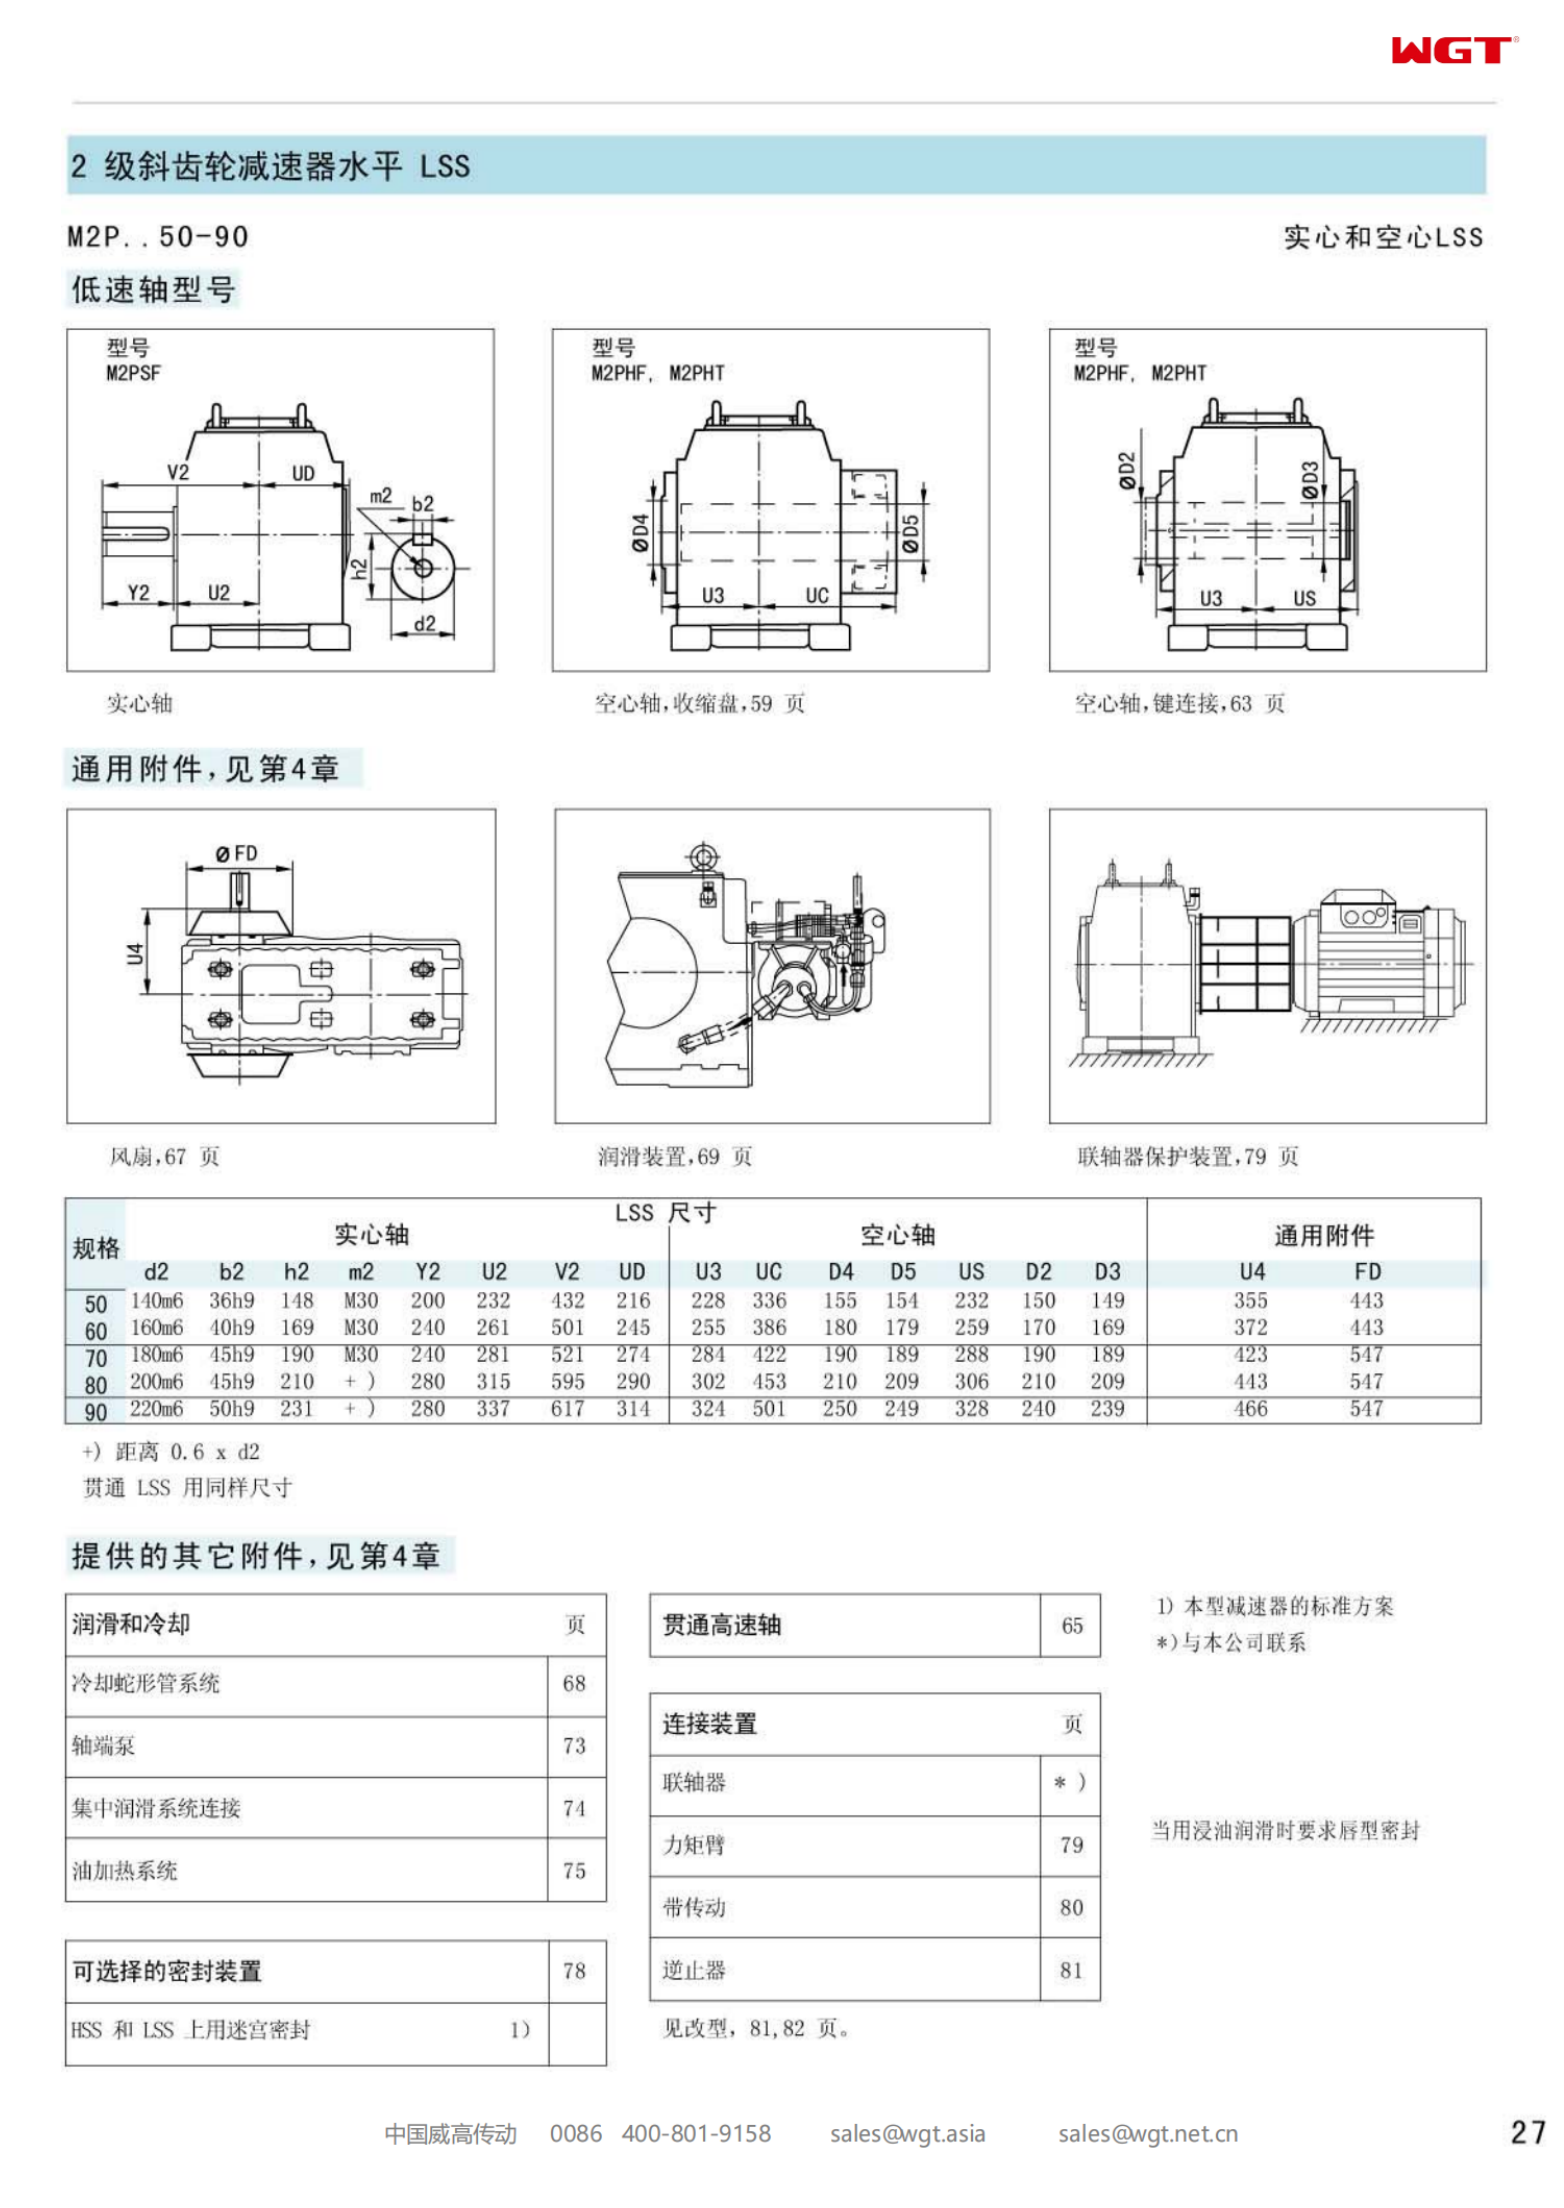 M2PHT50 Replace_SEW_M_Series Gearbox